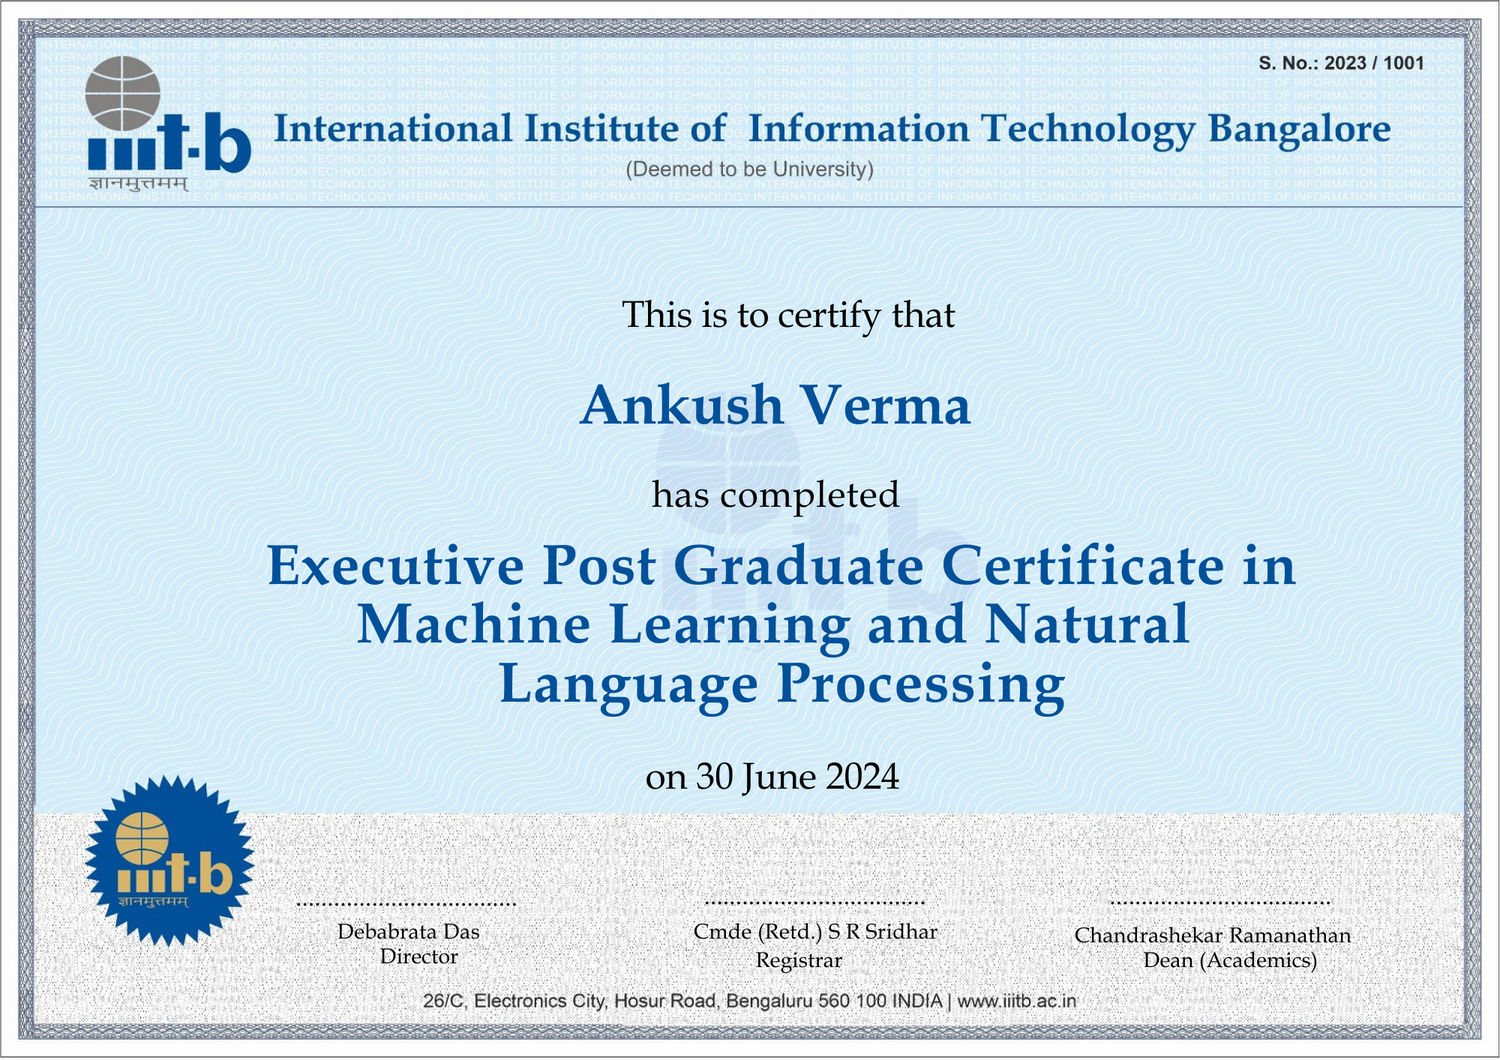 Complete all the NLP Machine Learning courses successfully to obtain this prestigious recognition from IIIT Bangalore. It is India's #1 Technical University (Private) as per the survey of India Today, 2021.